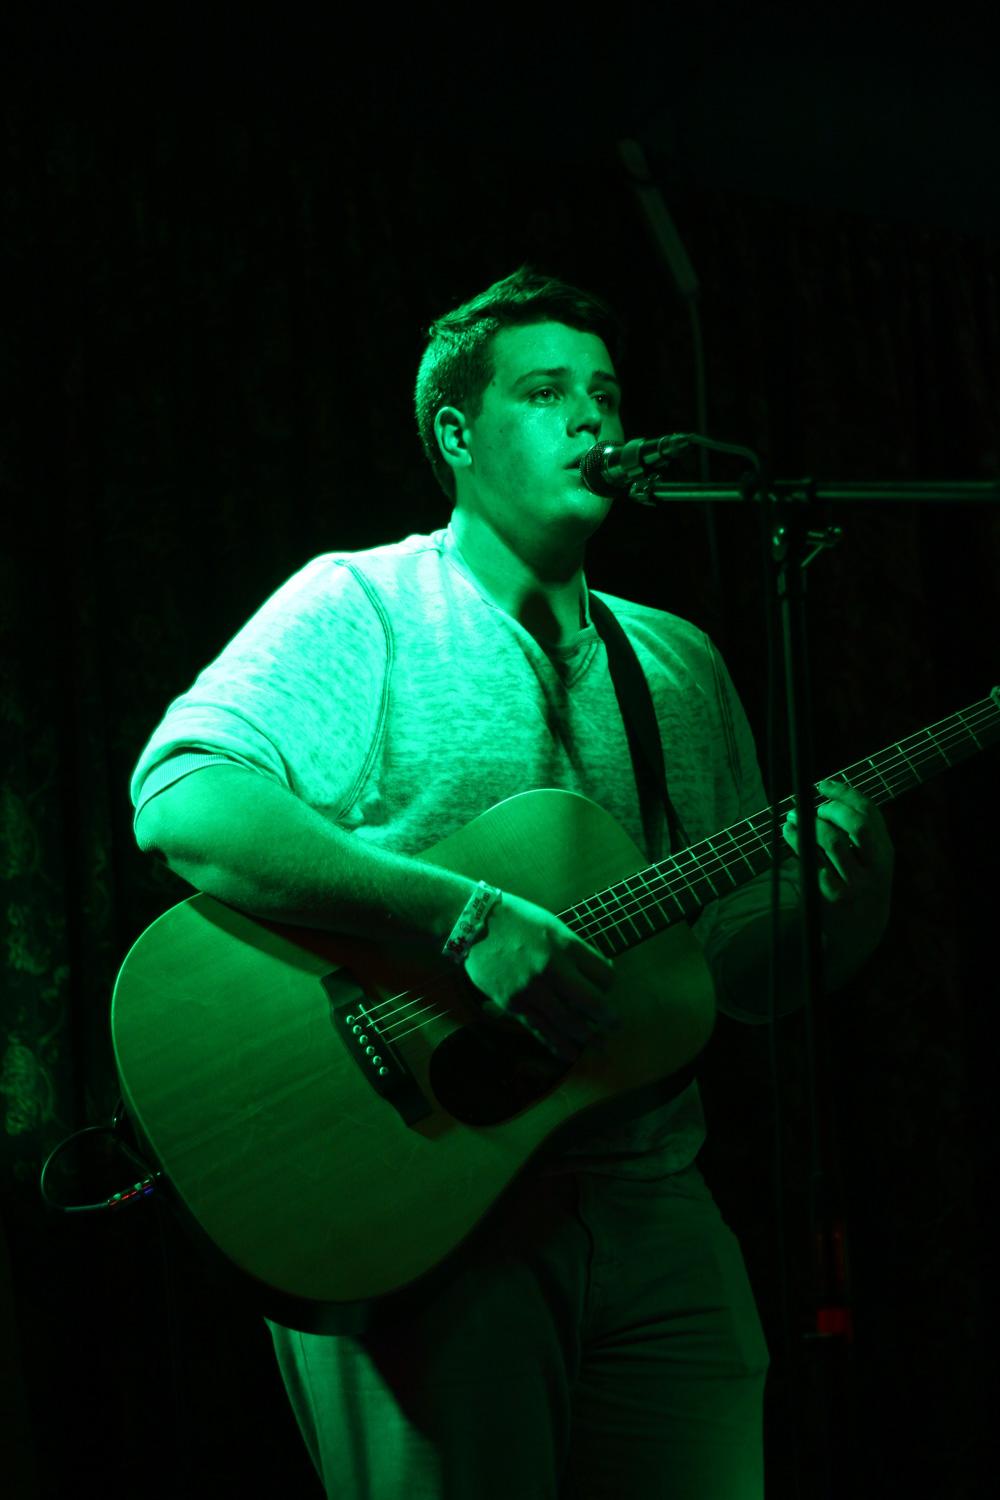 Sophomore accounting major Mitchell Parke performing alongside Garrett Kealer (not pictured) at the Funky Buddha Lounge & Brewery.  Josh Talero | Contributing Photographer